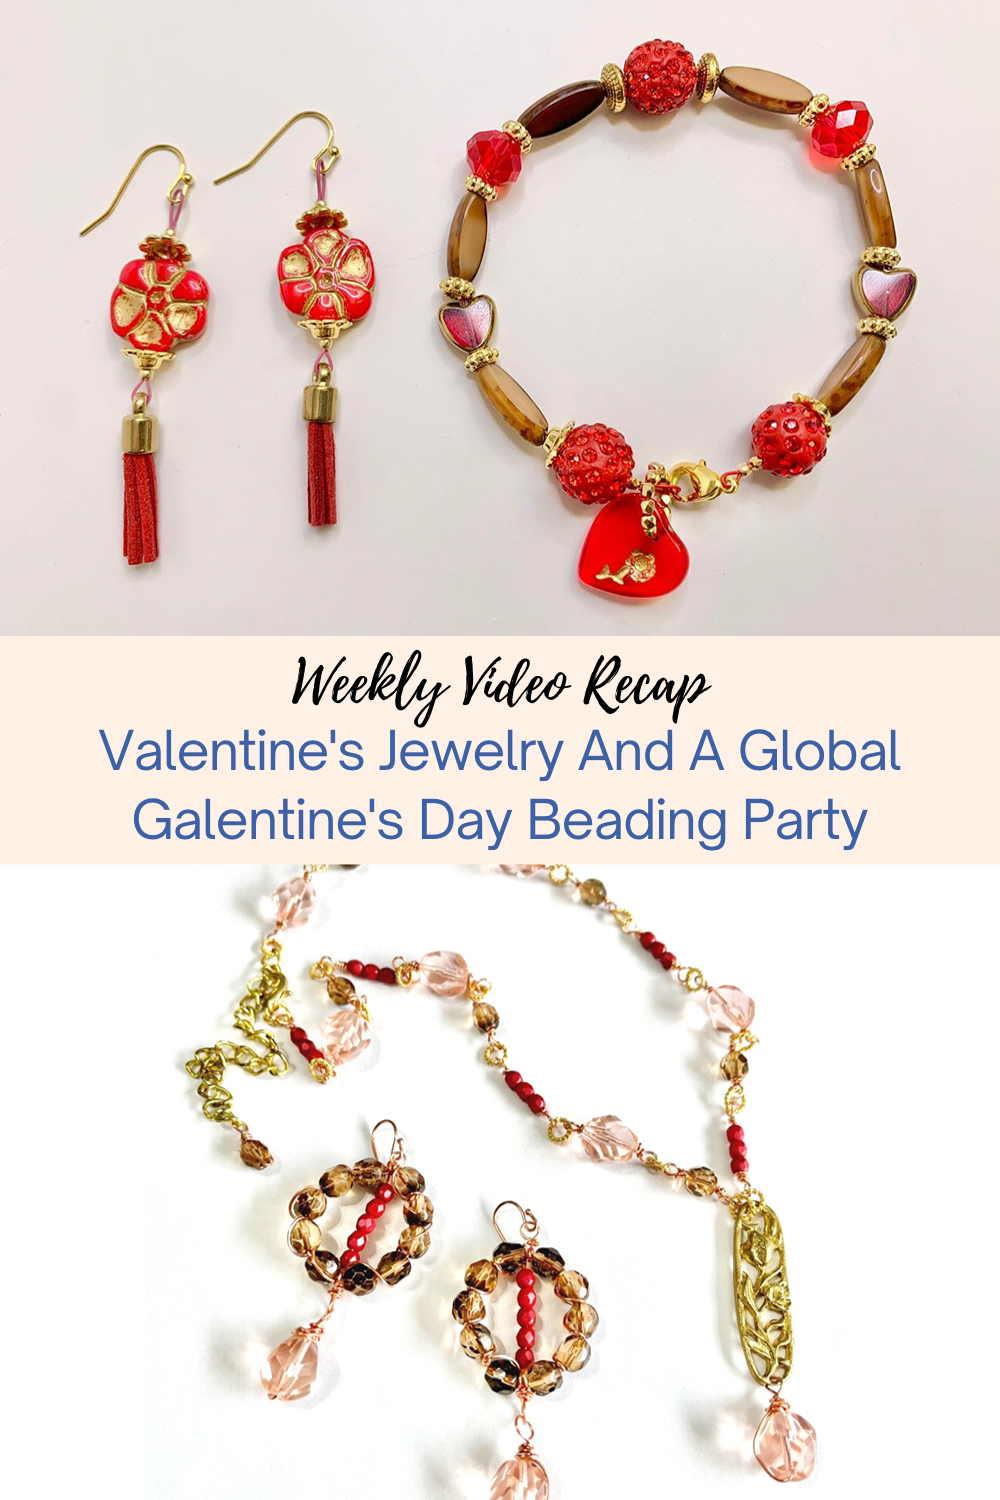 Valentine's Jewelry And A Global Galentine's Day Beading Party Collage